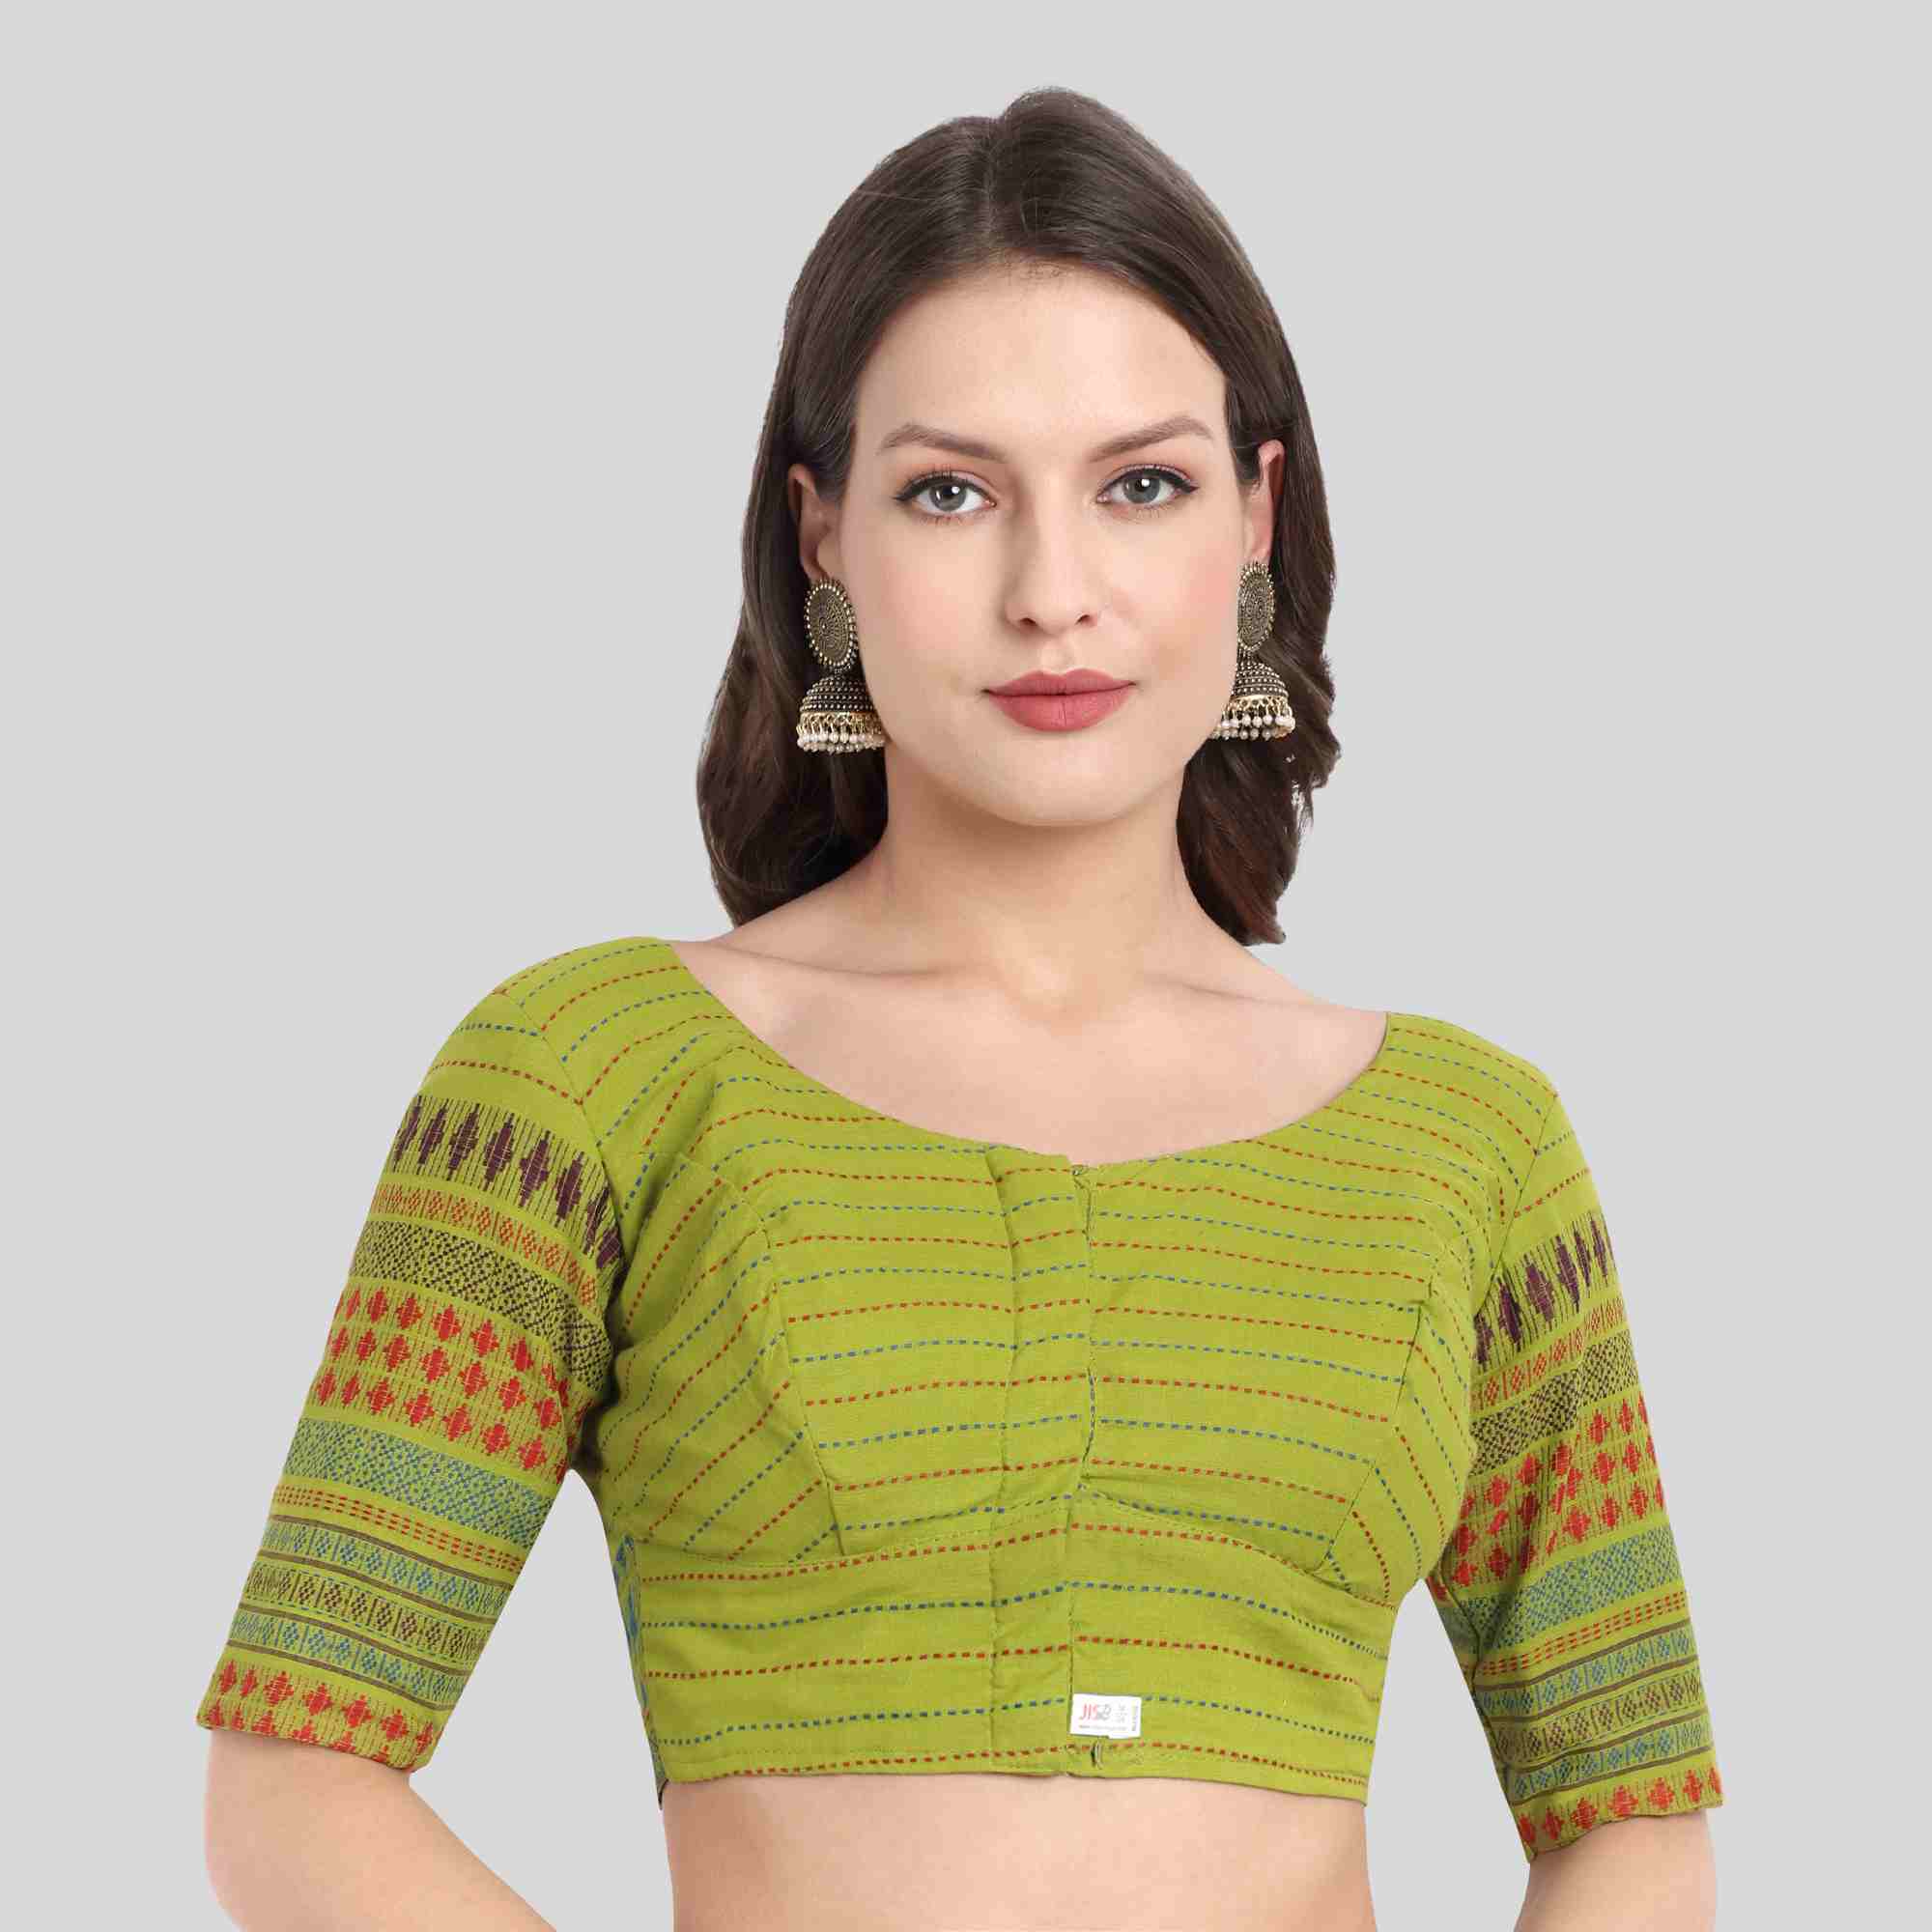 Elbow Border readymade blouse in Color Green with Contrast color Border